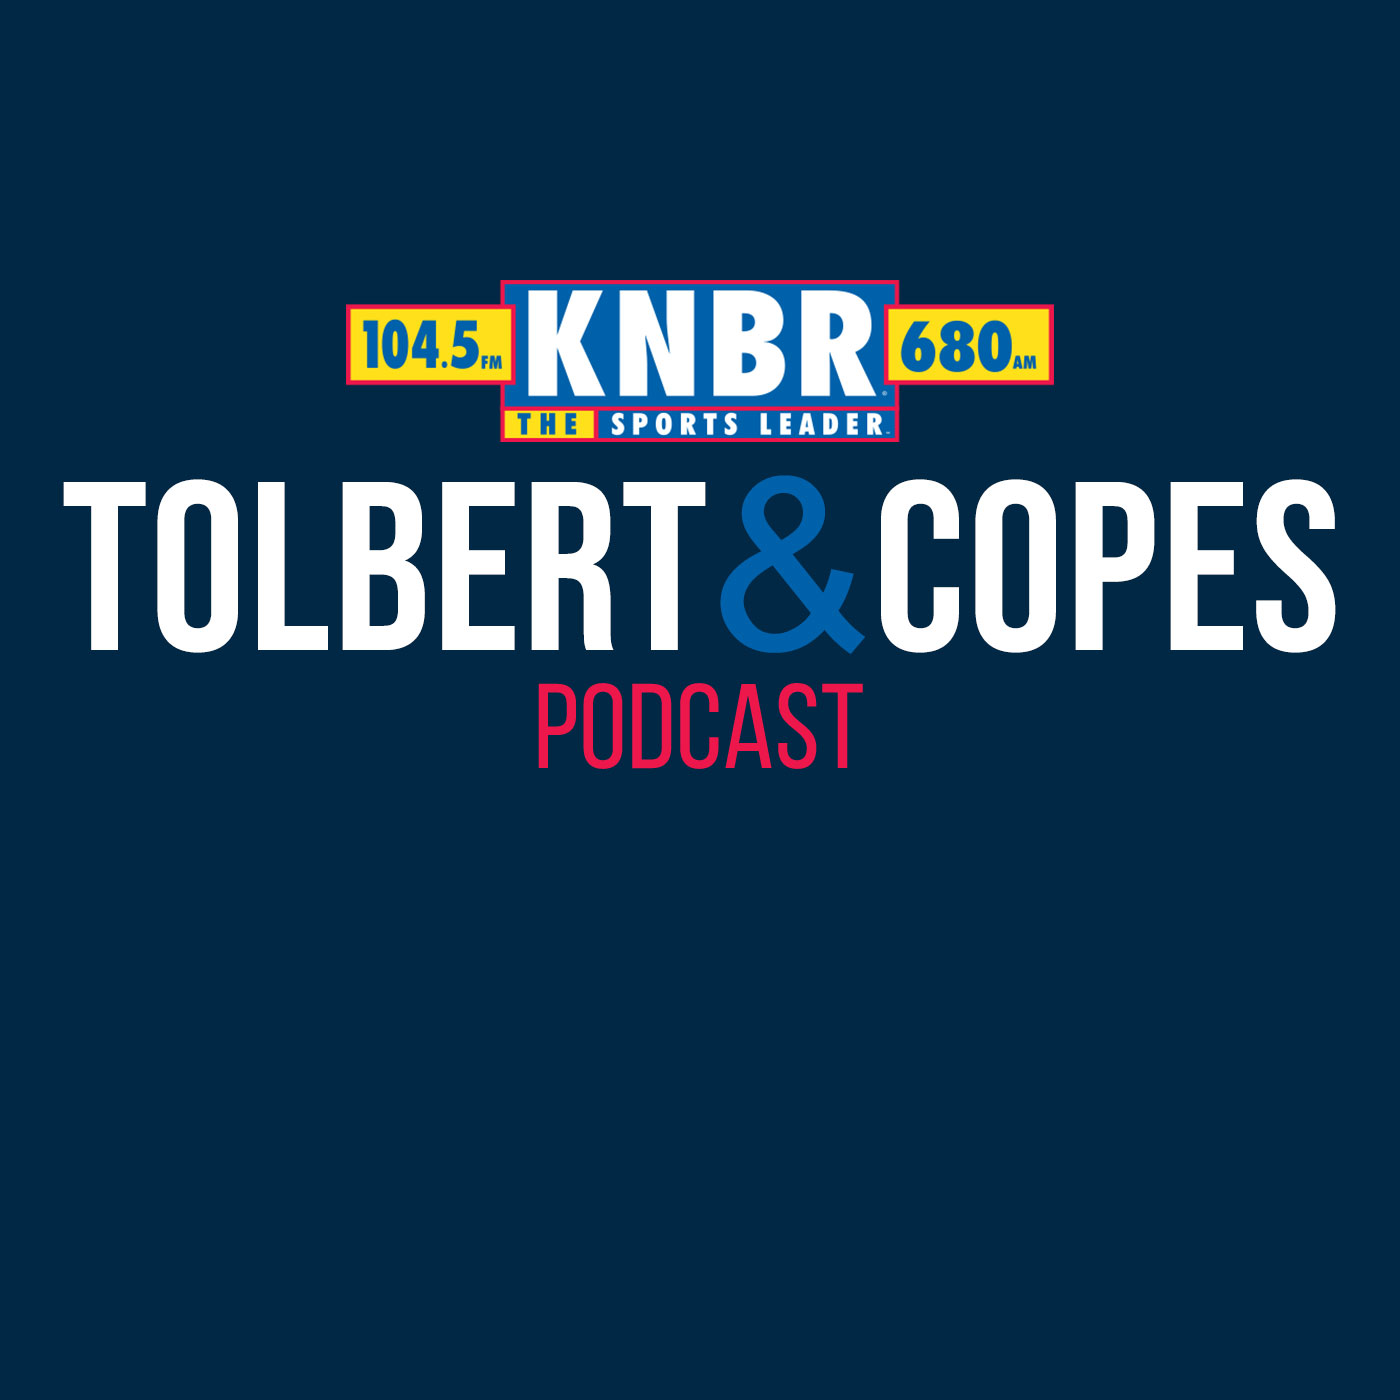 3-2 Susan Slusser, joins Tolbert and Copes to discuss what went wrong in the negotiations between MLB and MLBPA